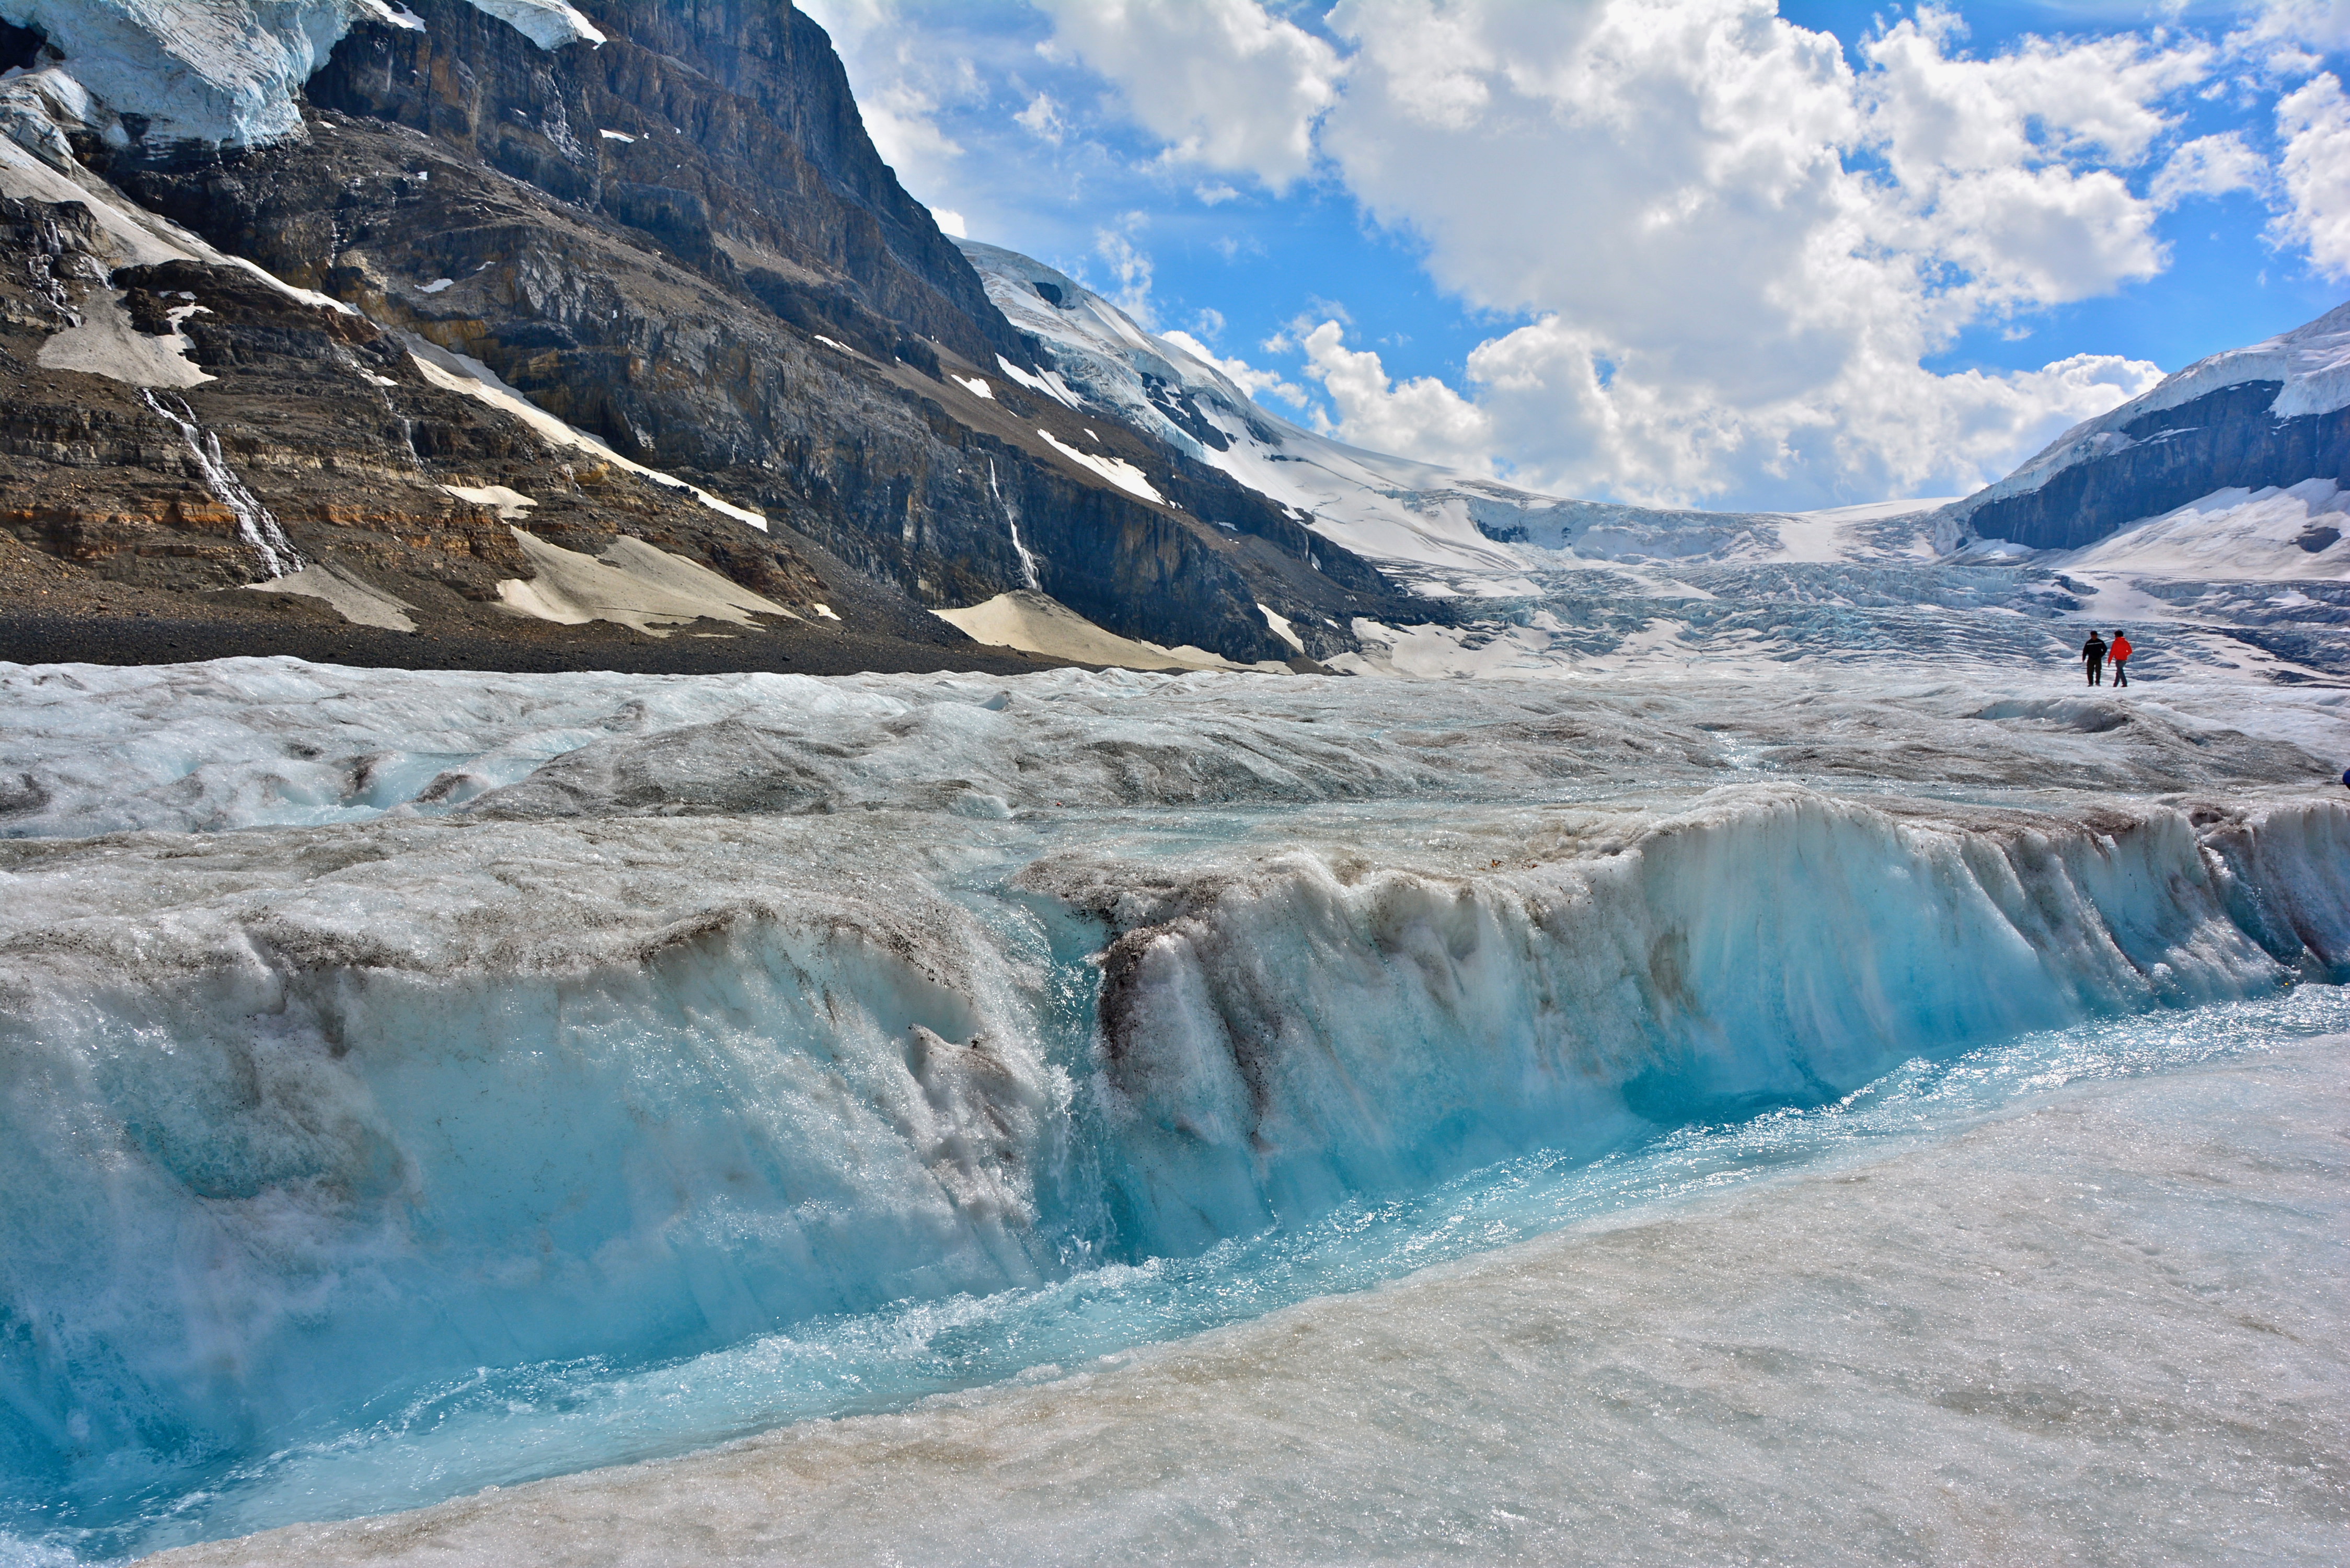 Taken during my visit to the Columbia Glacier in Banff National Park.